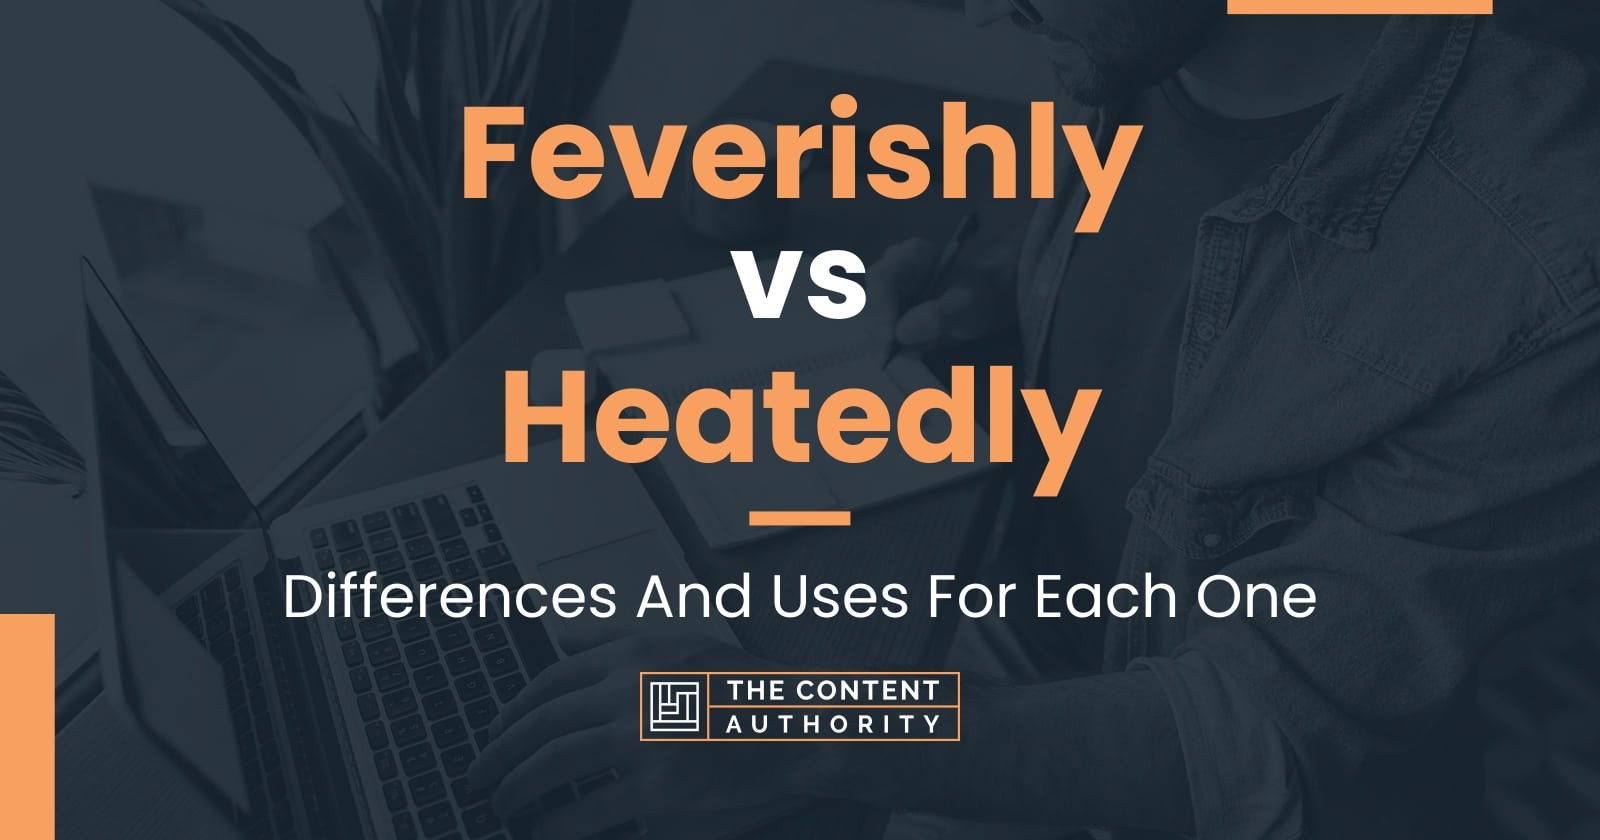 Feverishly vs Heatedly Differences And Uses For Each One